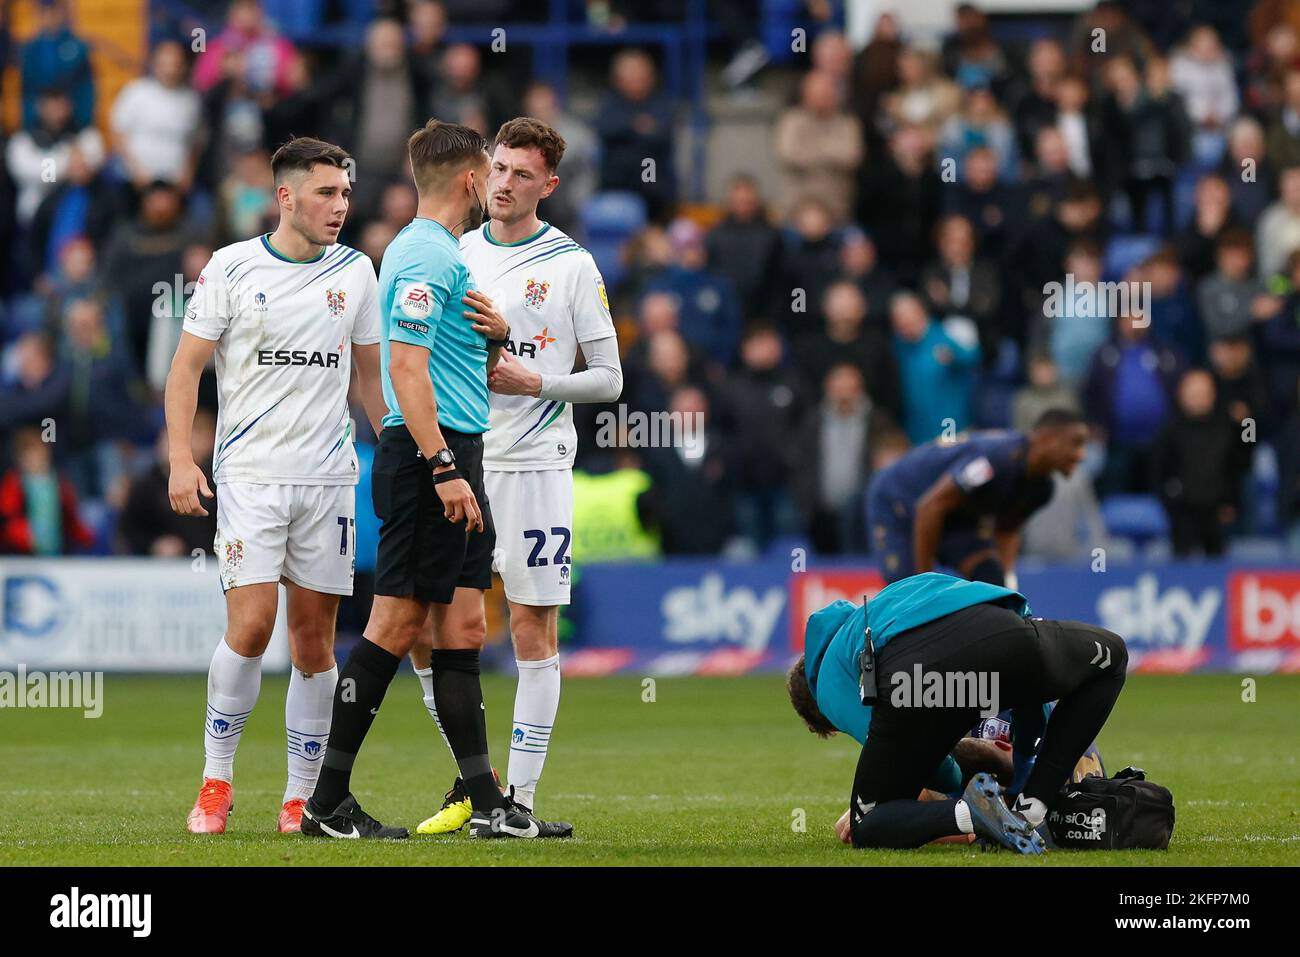 Josh Hawkes #11 and Paul Lewis #22 of Tranmere Rovers talk with referee Thomas Kirk during the Sky Bet League 2 match Tranmere Rovers vs AFC Wimbledon at Prenton Park, Birkenhead, United Kingdom, 19th November 2022  (Photo by Phil Bryan/News Images) Stock Photo